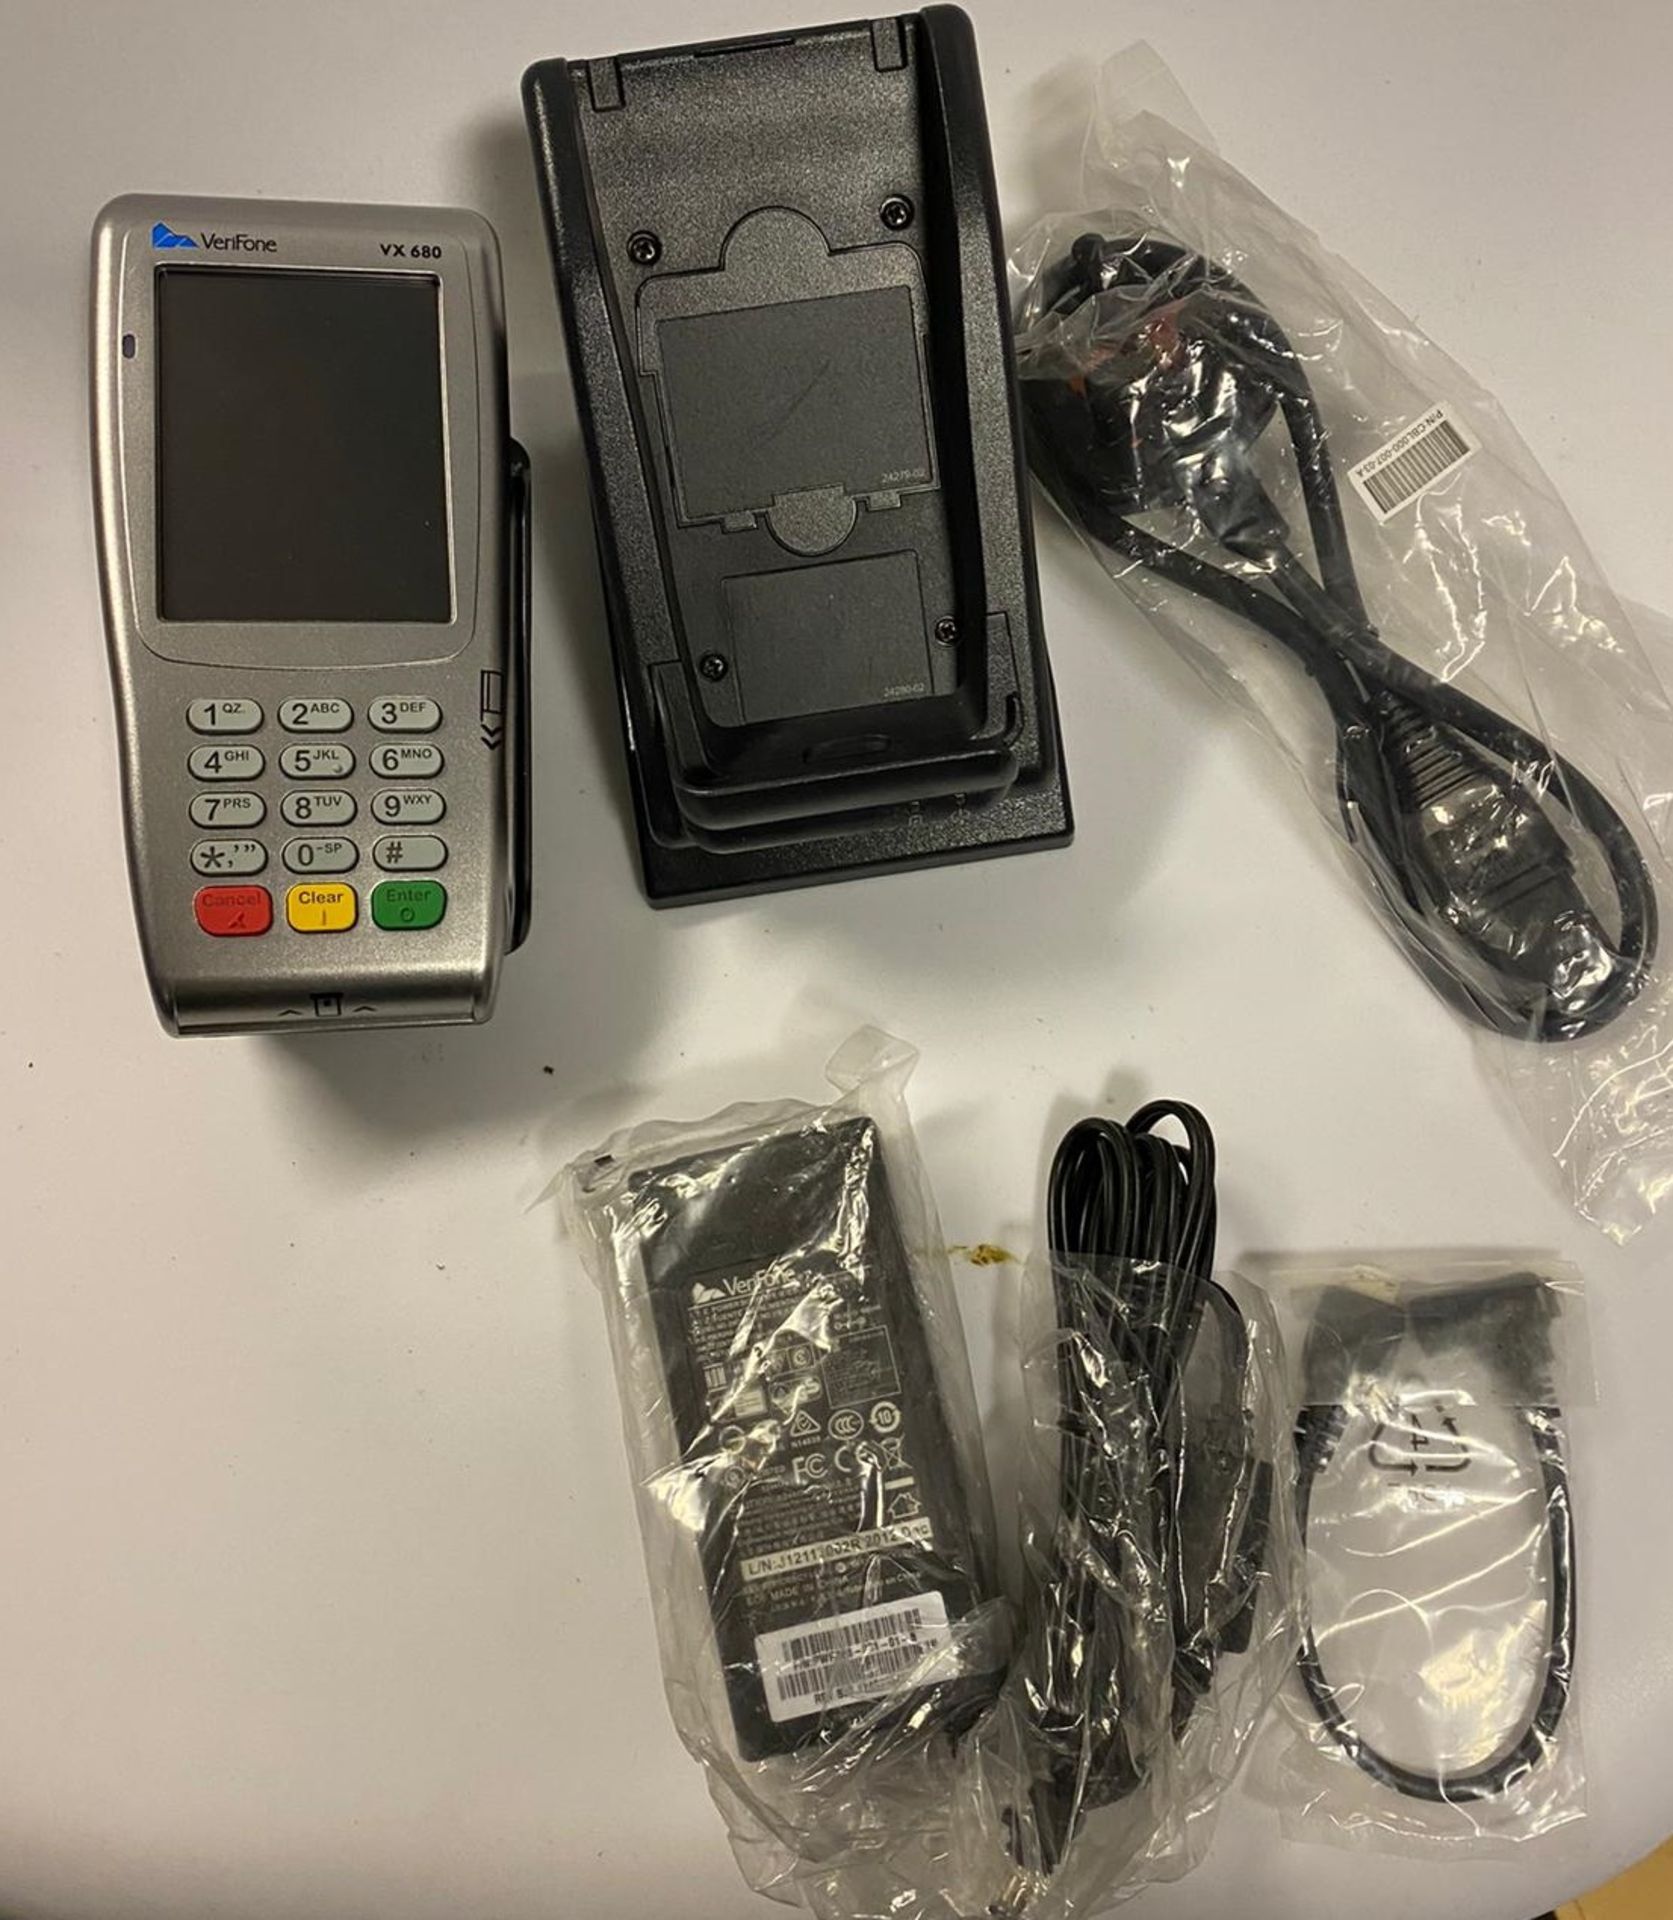 1 x Verifone VX 6803G EMV Smart/Chip Card & COntactless - New and Boxed - Location: Altrincham WA14